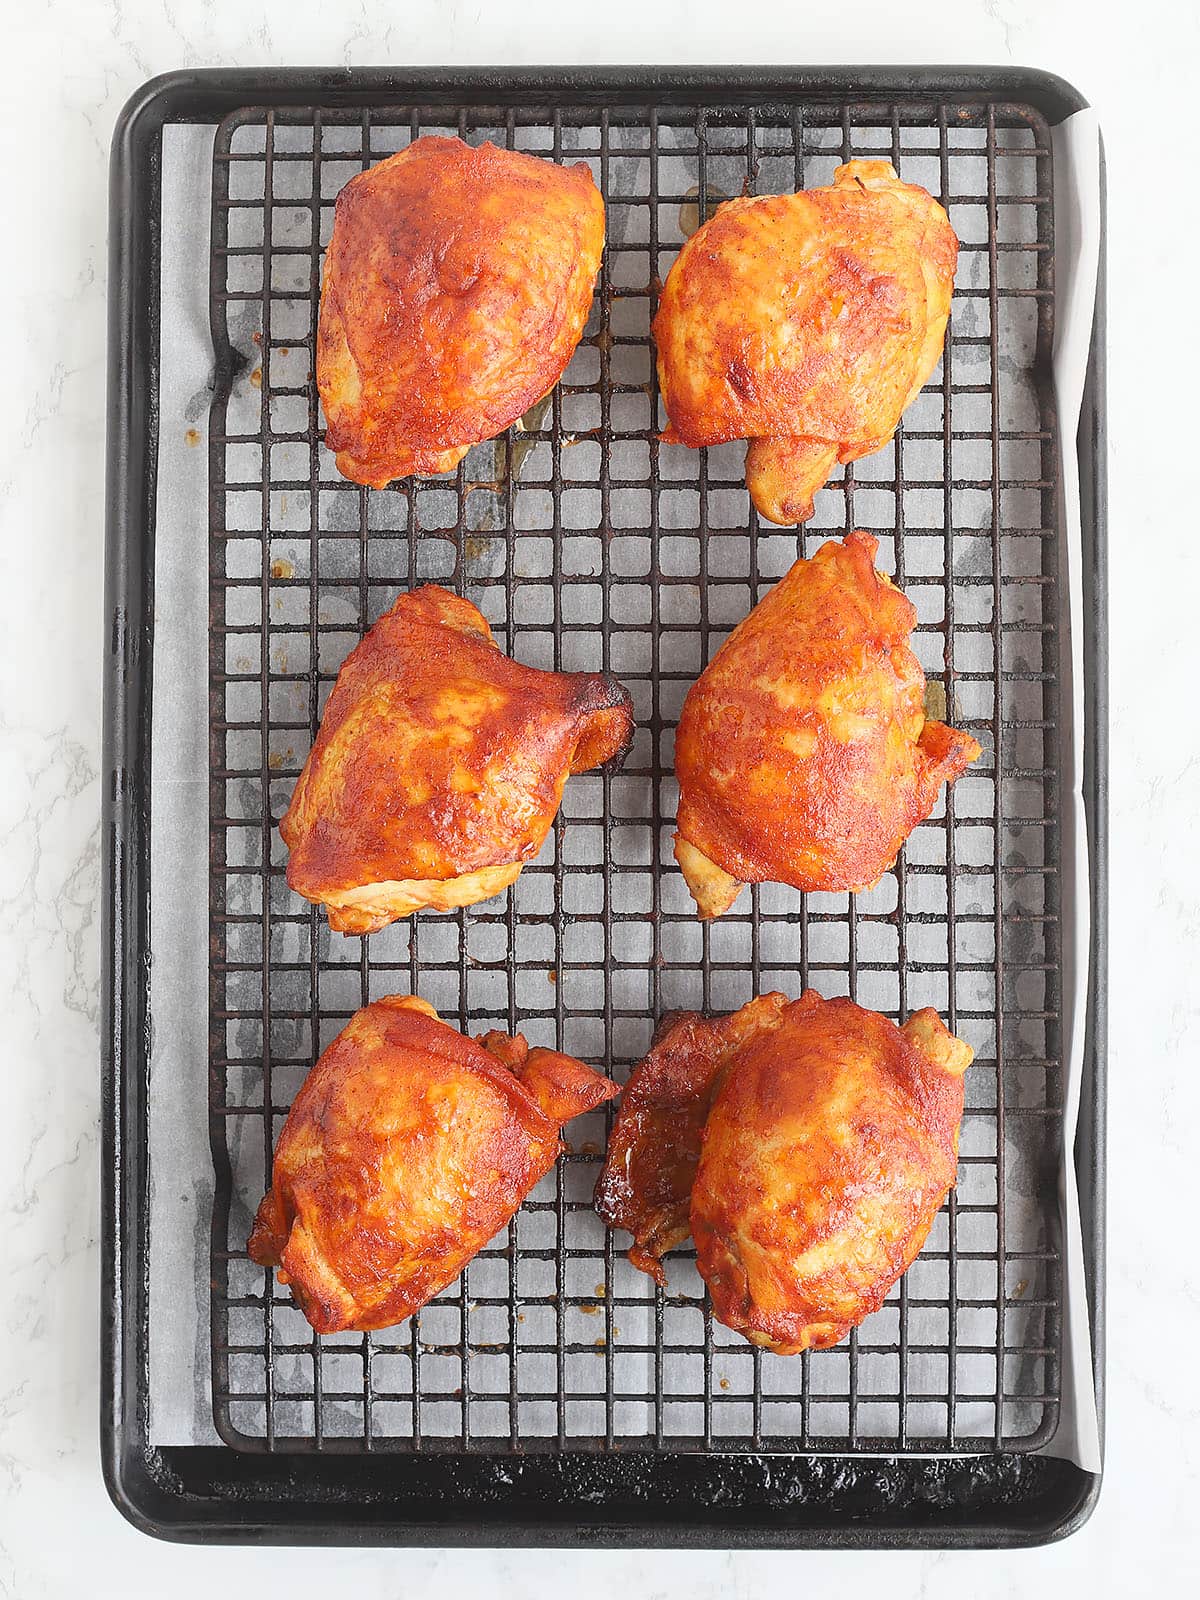 six pieces of oven baked BBQ chicken thighs on a baking rack after coming out of the oven.